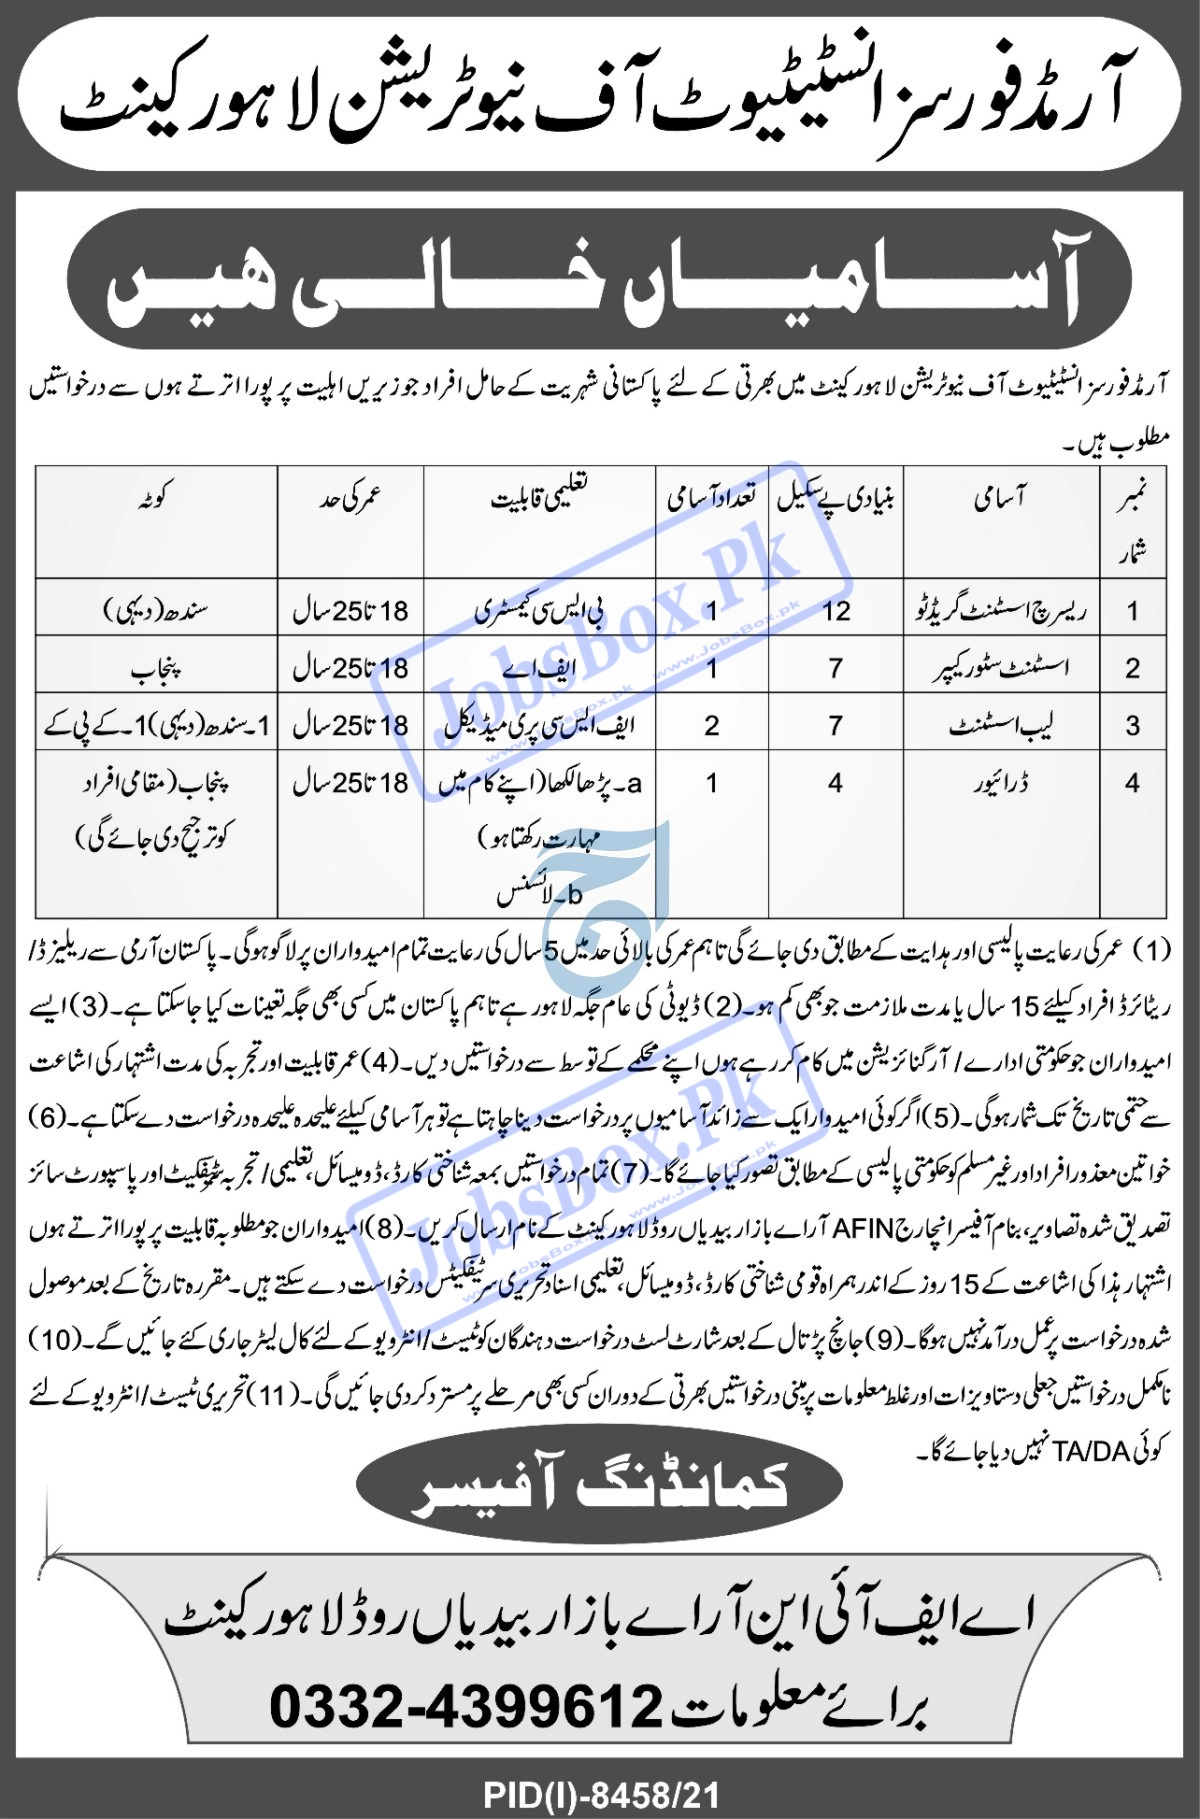 Armed Forces Institute of Nutrition Lahore Jobs 2022